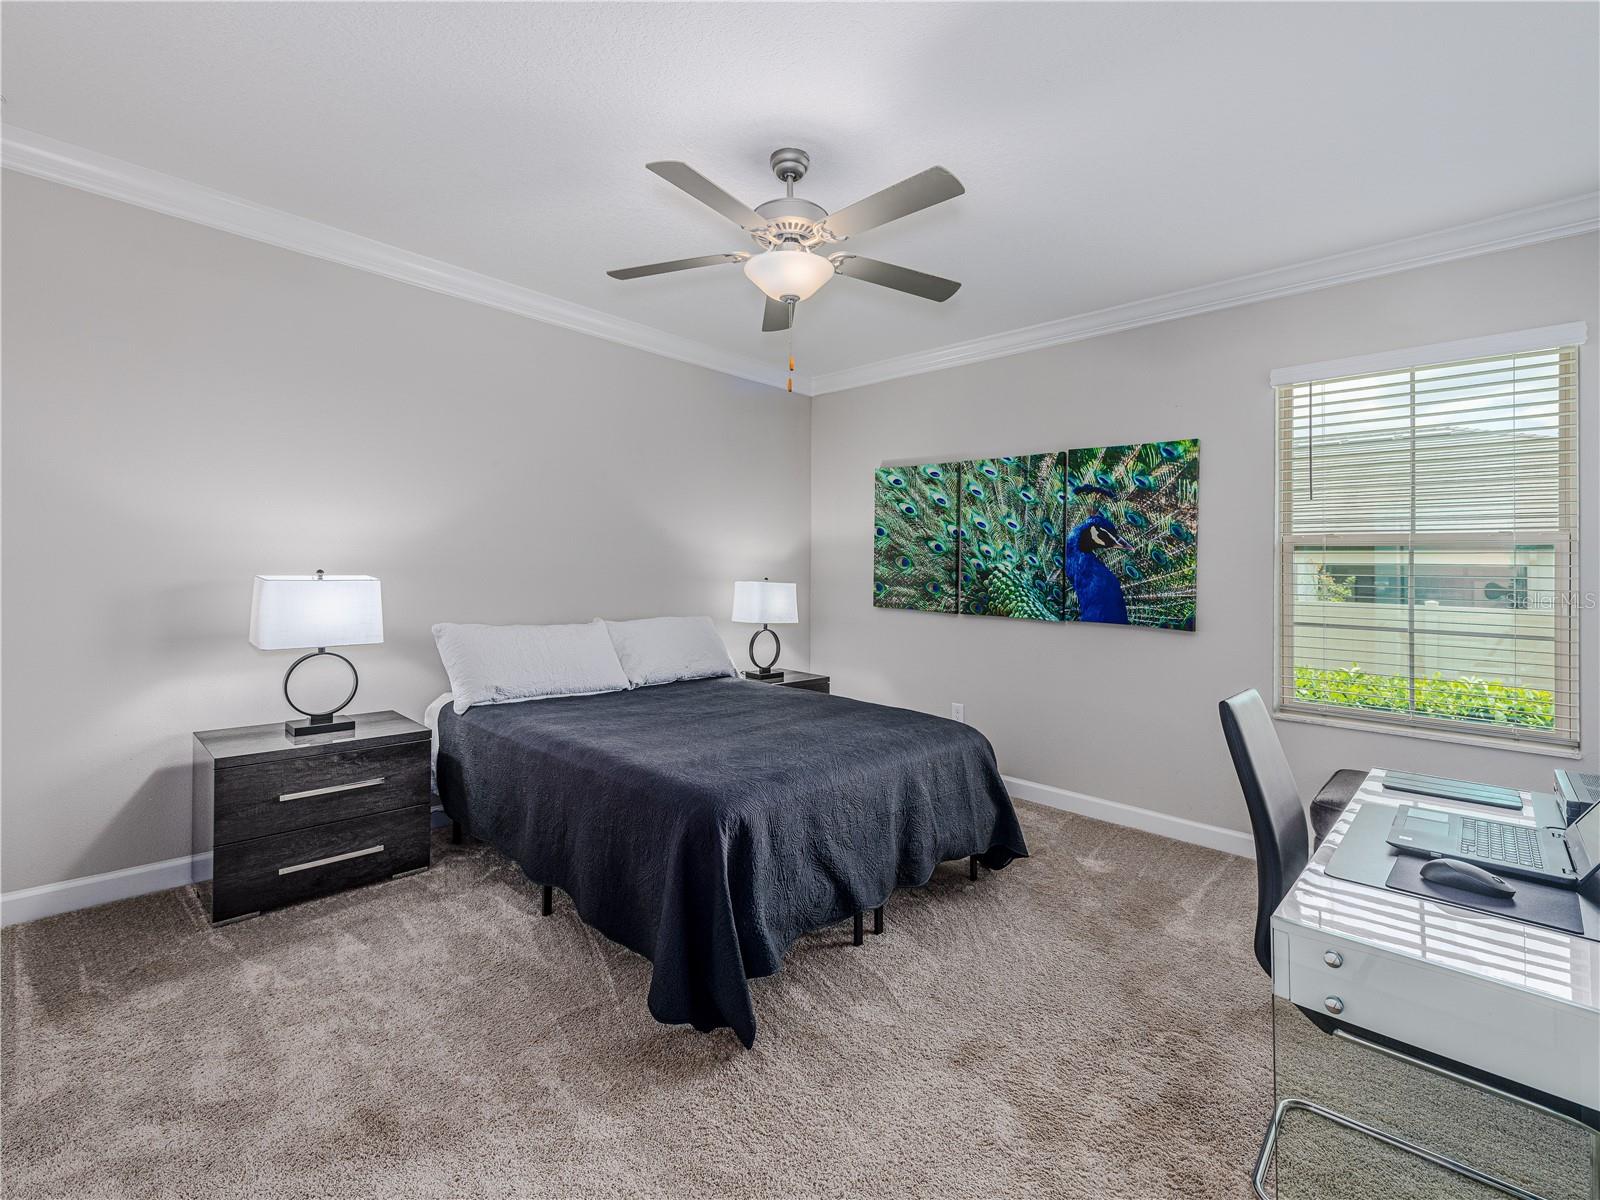 Huge Master Bedroom with Upgraded Ceiling Fan